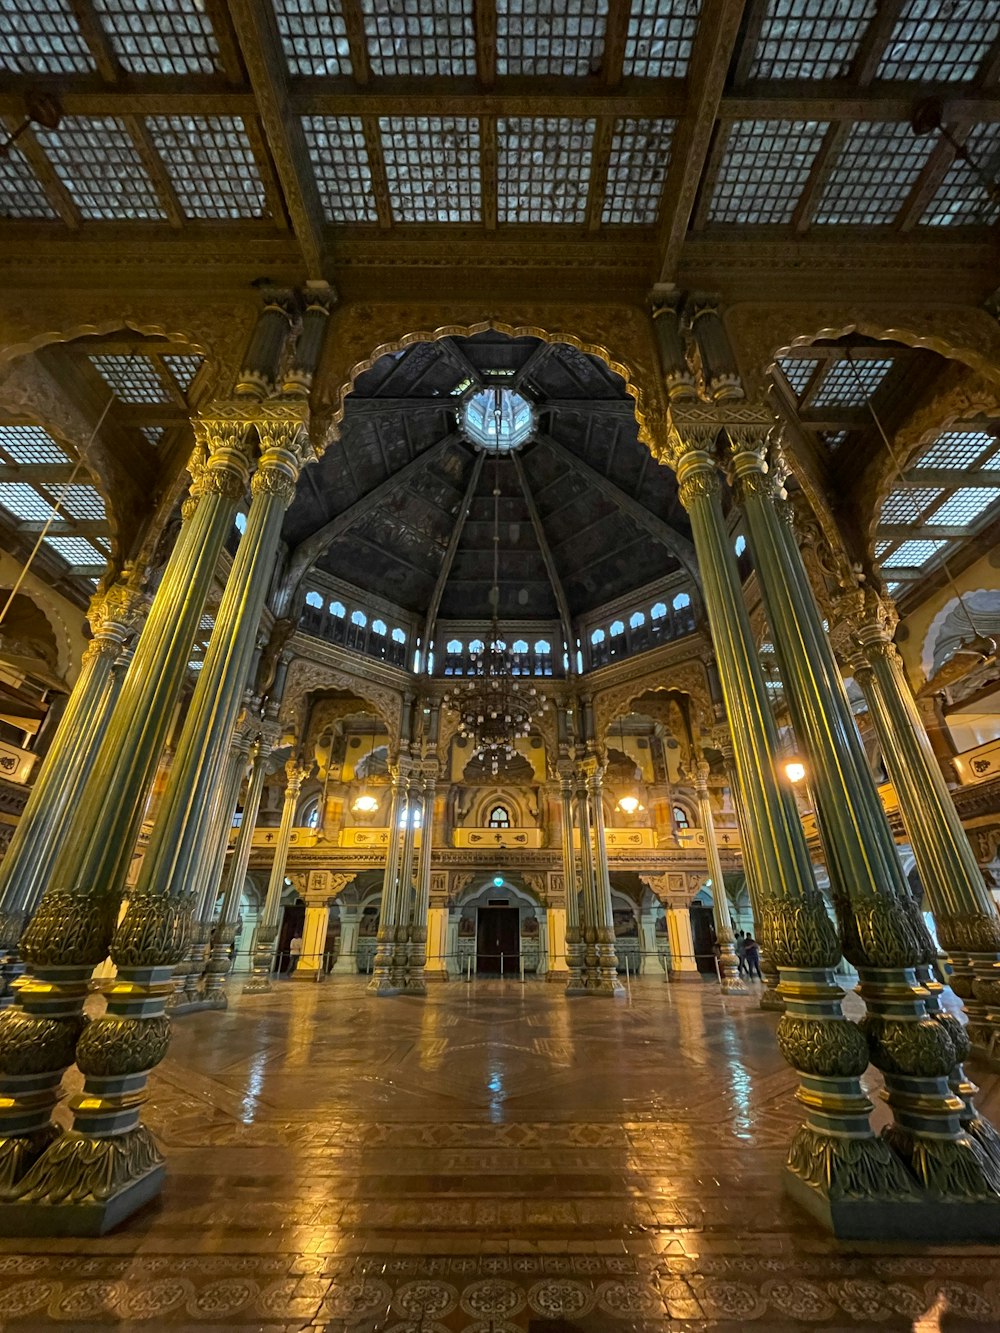 a large ornate building with a large ceiling and many columns